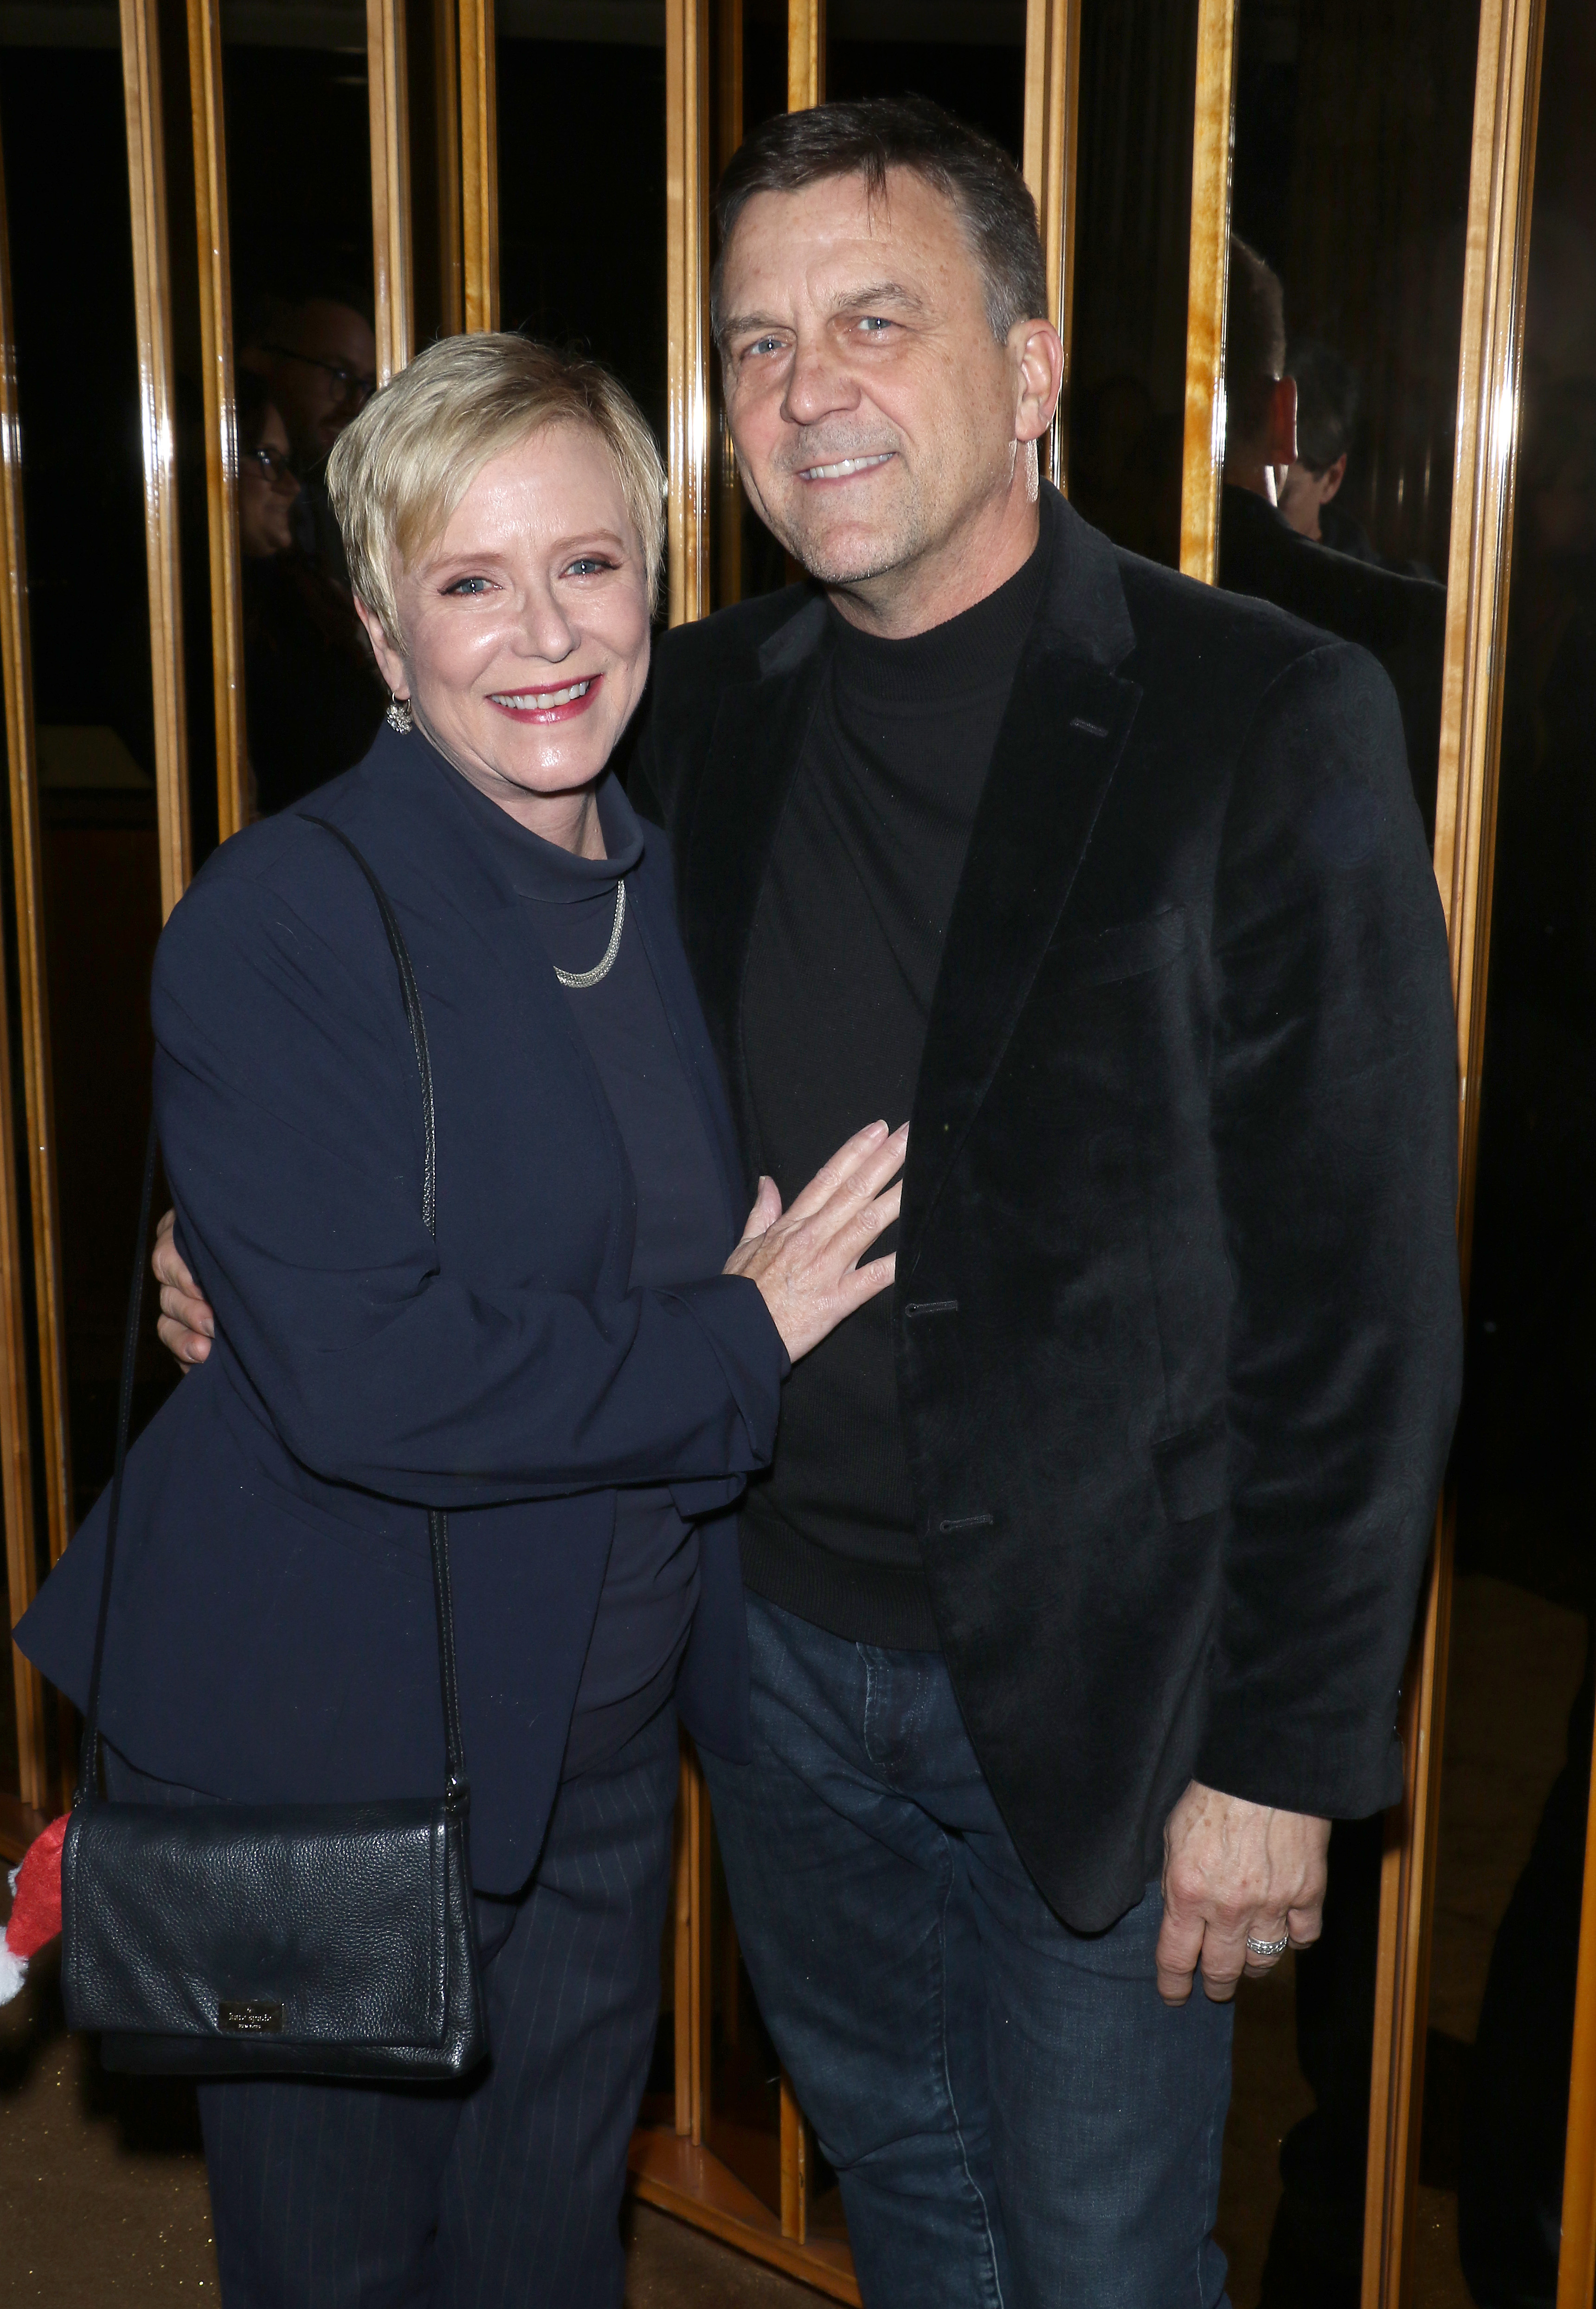 Eve Plumb and her husband Ken Pace in New York in 2019 | Source: Getty Images